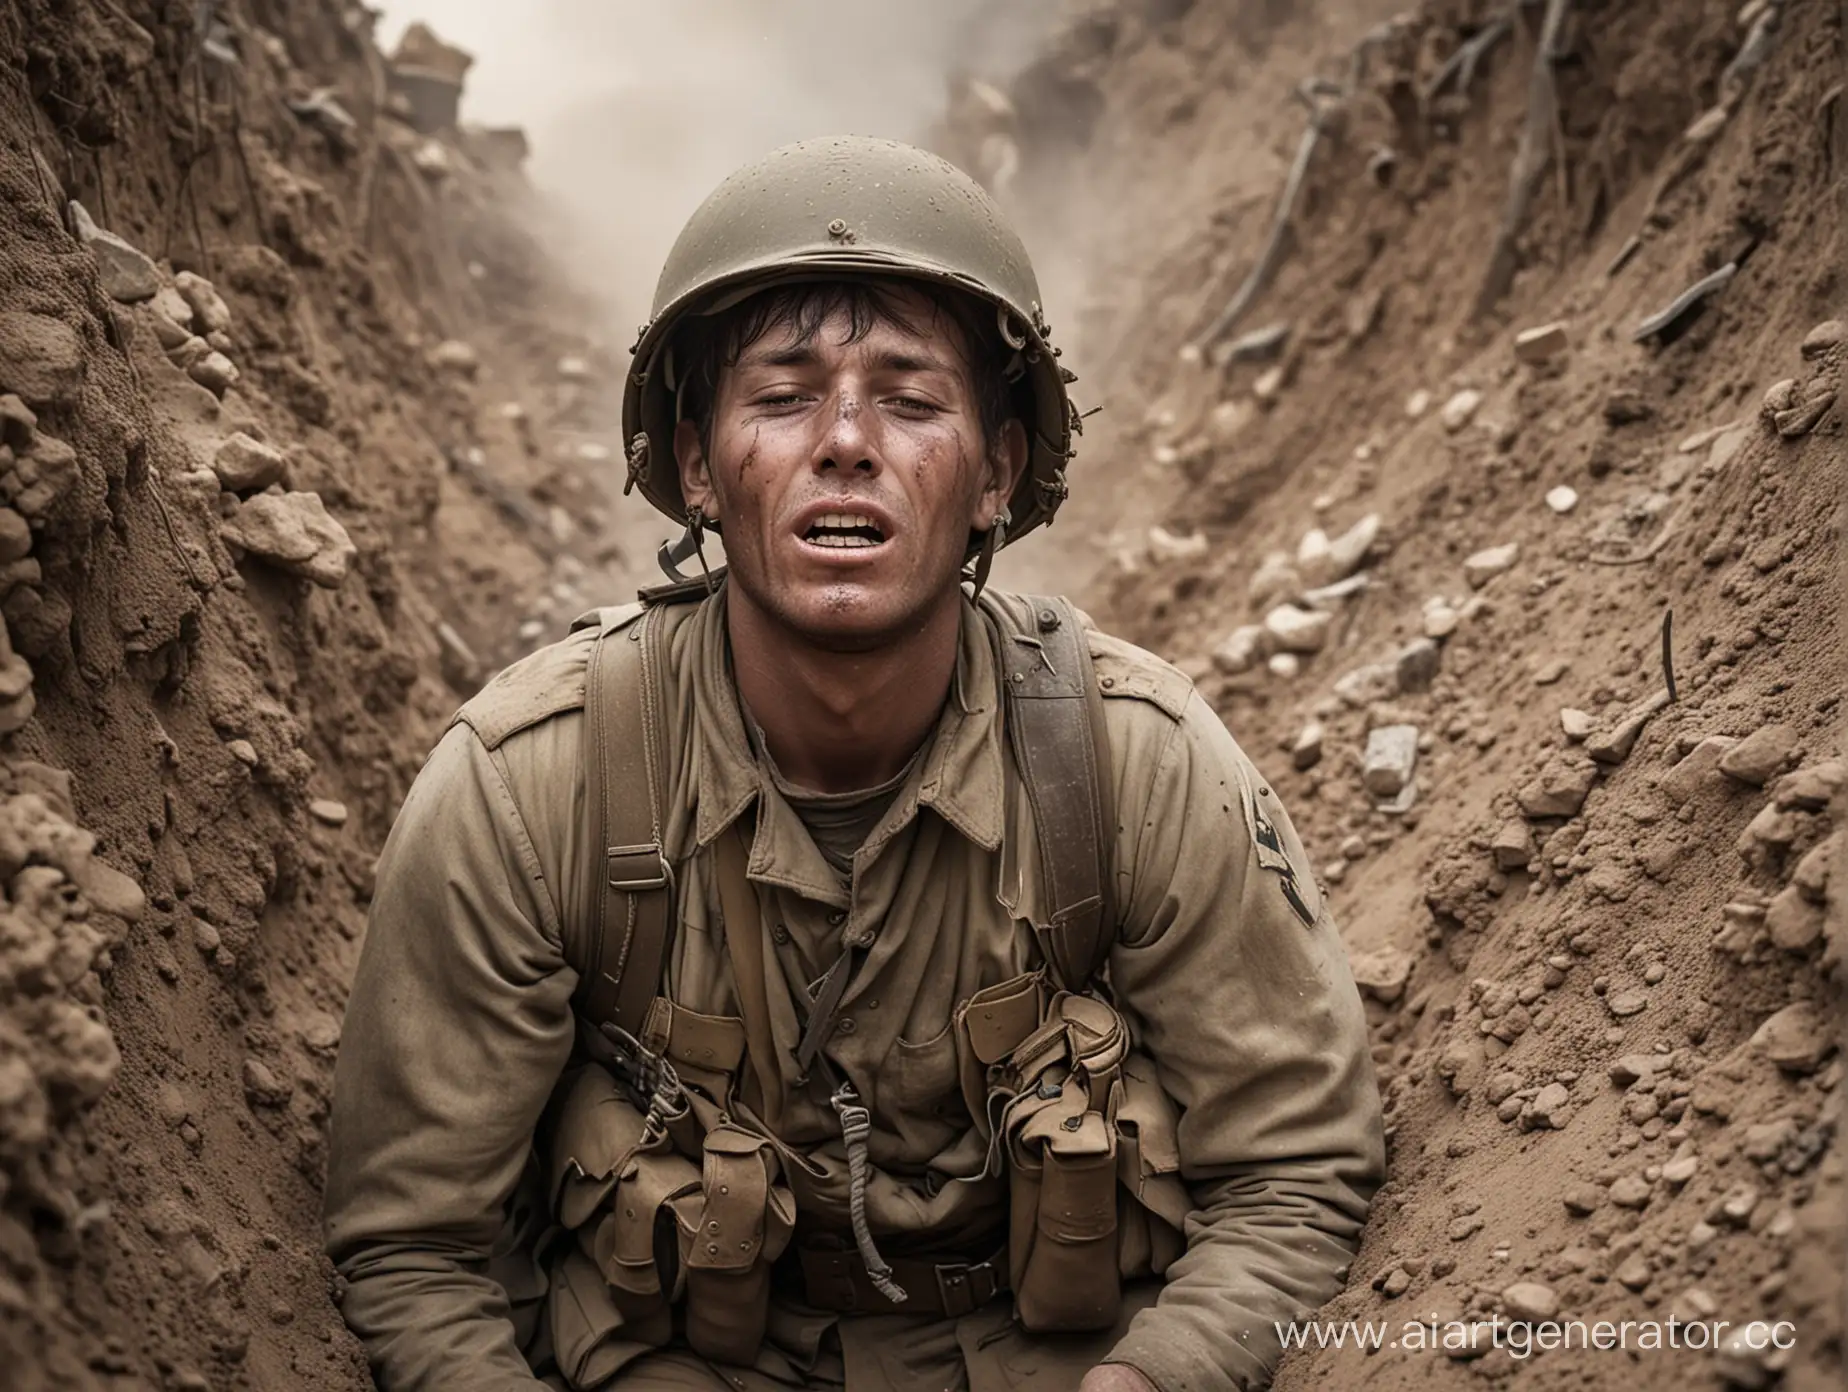 A wounded soldier after a battle in a trench, greedily swallowing smoky and dusty air.